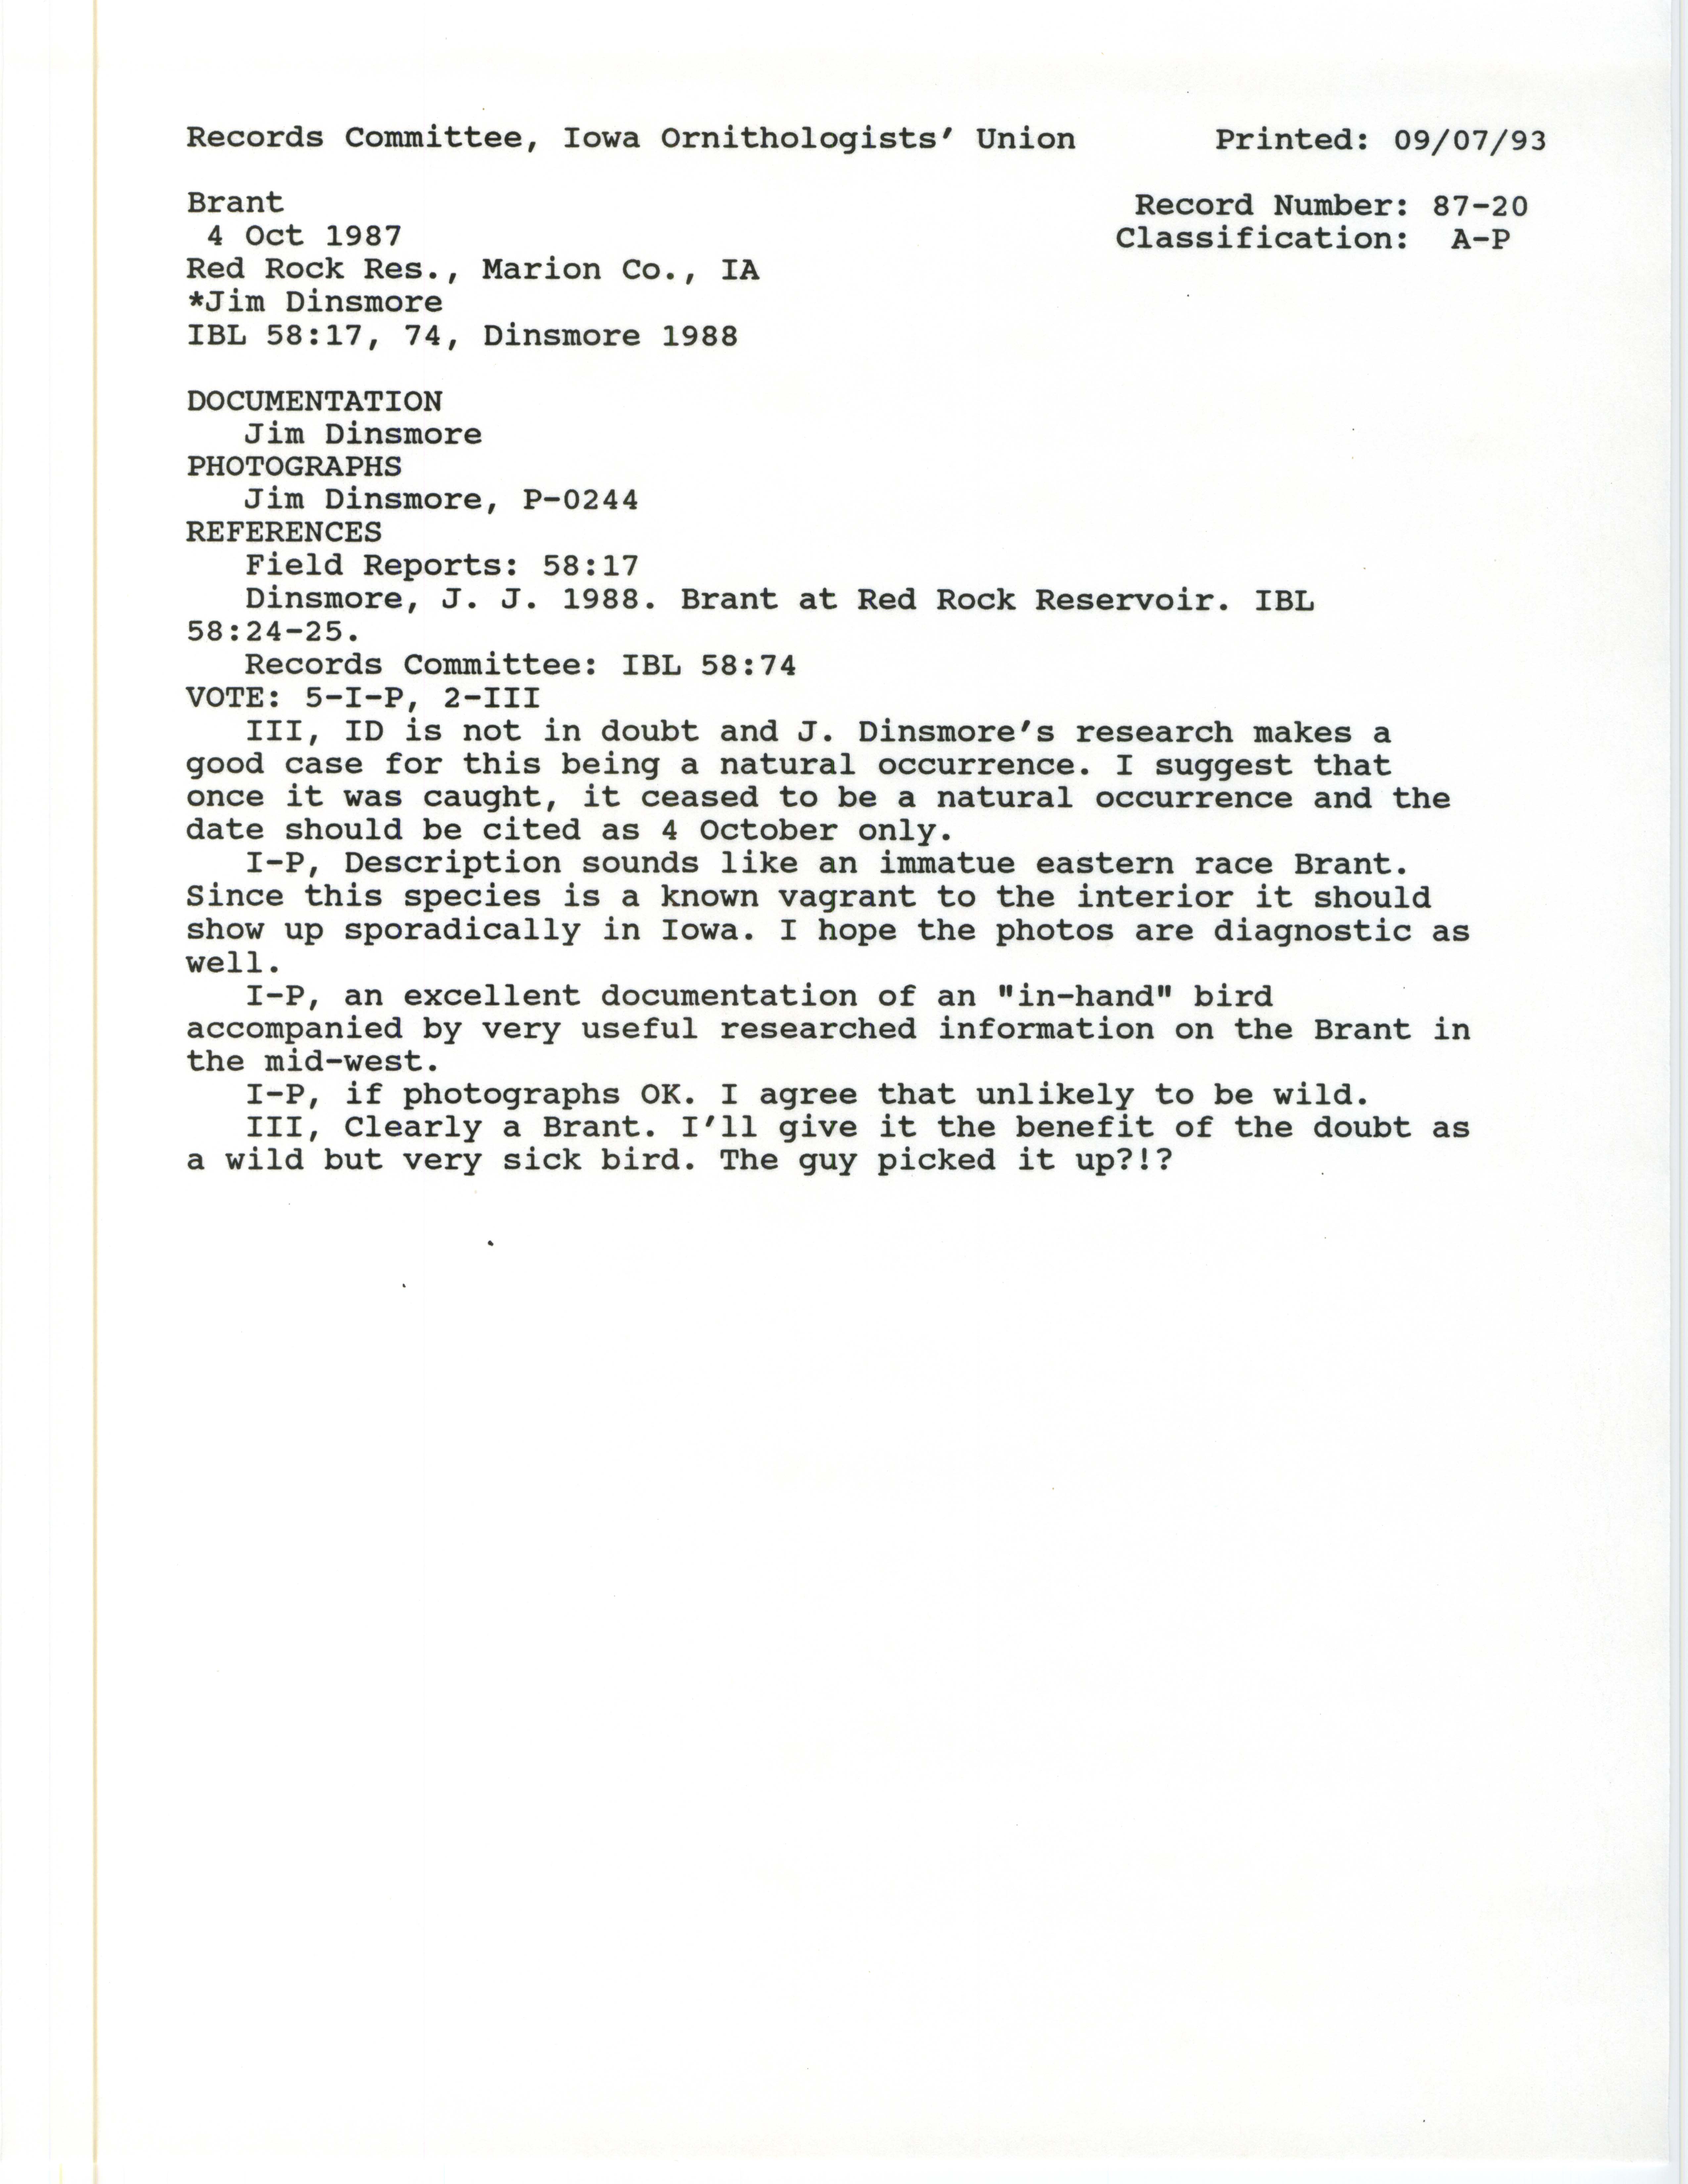 Records Committee review for rare bird sighting of Brant at Whitebreast Park, 1987